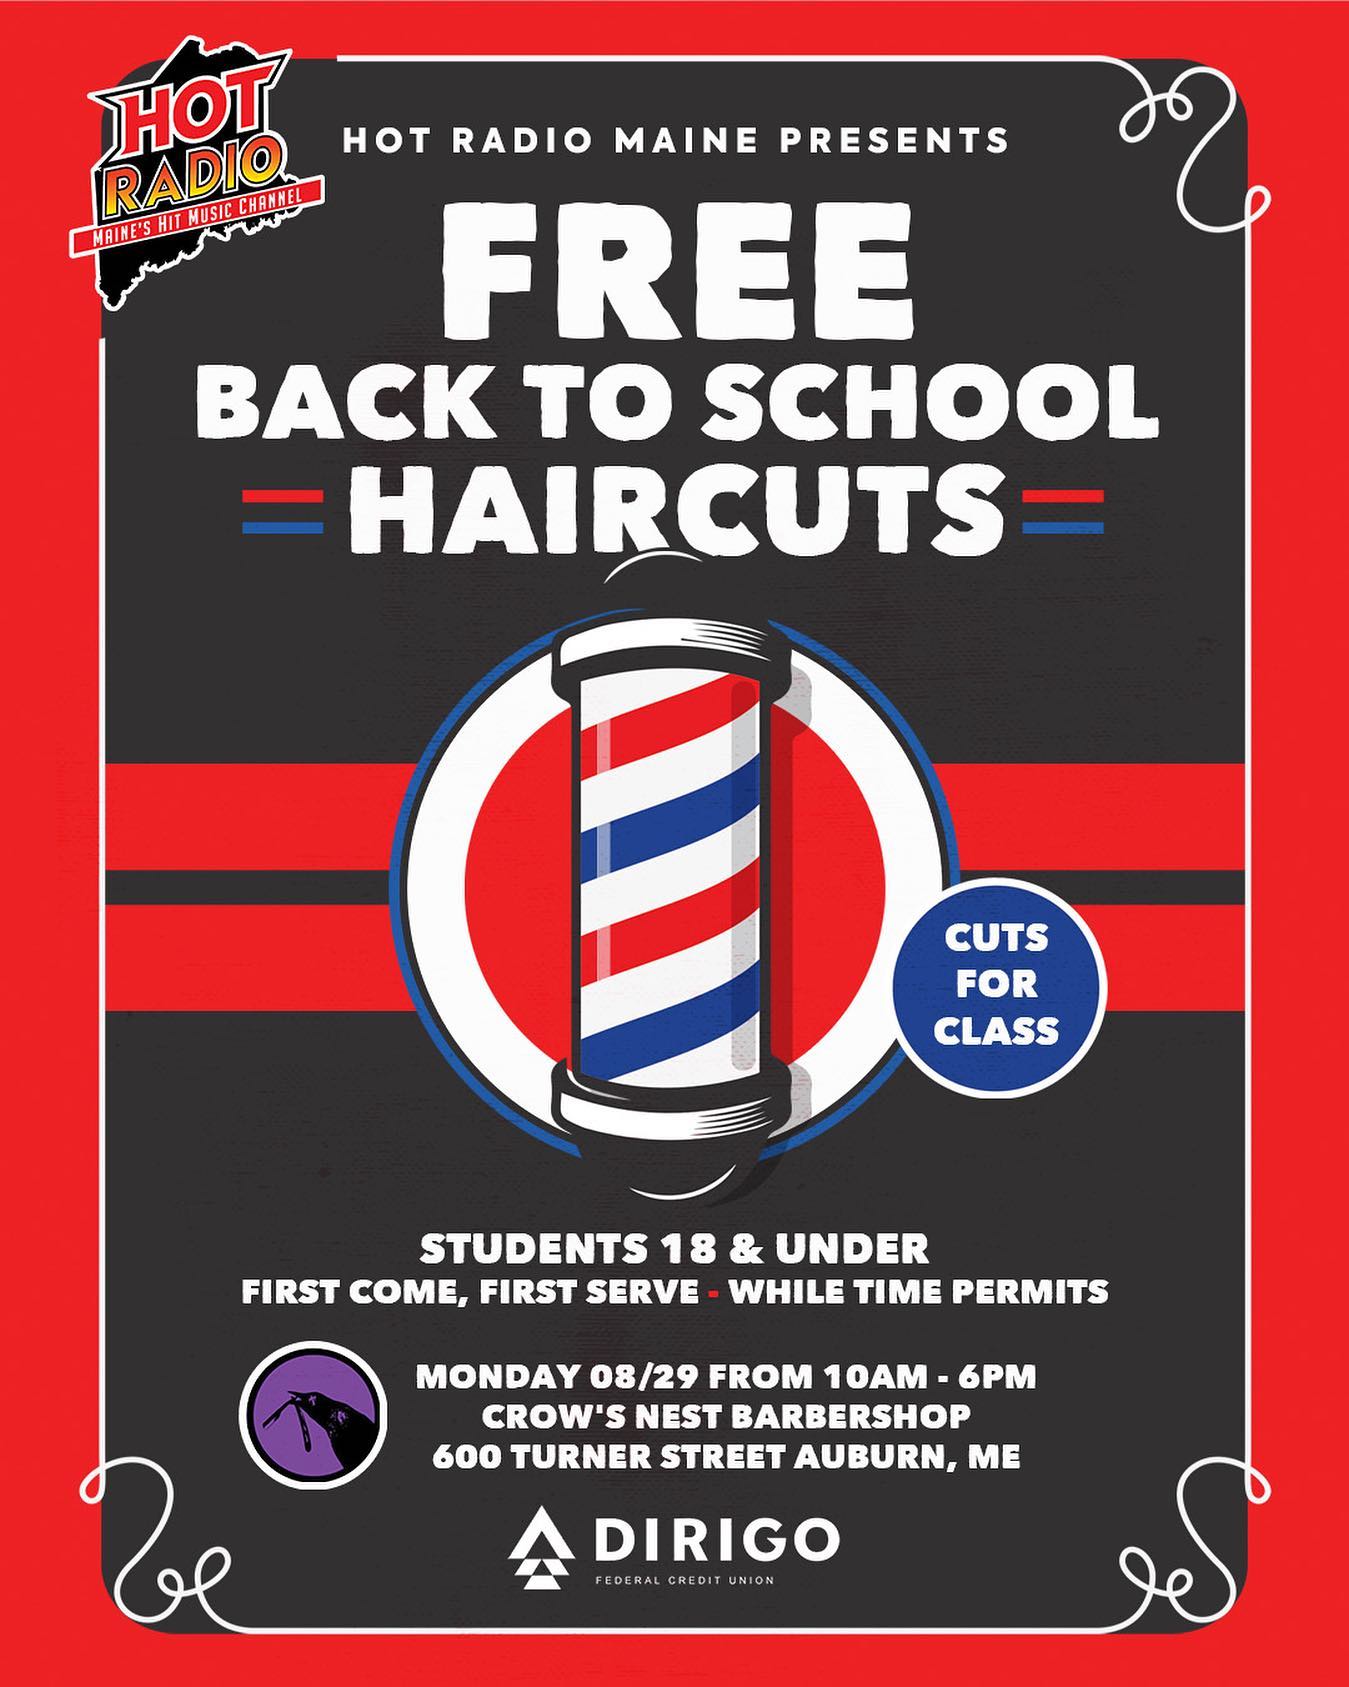 FREE BACK TO SCHOOL HAIRCUTS ðŸ’ˆ Our 2nd Annual Cuts for Class event is going down Monday 8/29 at @crowsnestauburn from 10a-6p.  Free Cuts for Students 18 & Under.  First come first serve.  While time permits. Made Hot in Maine by @dirigofcu